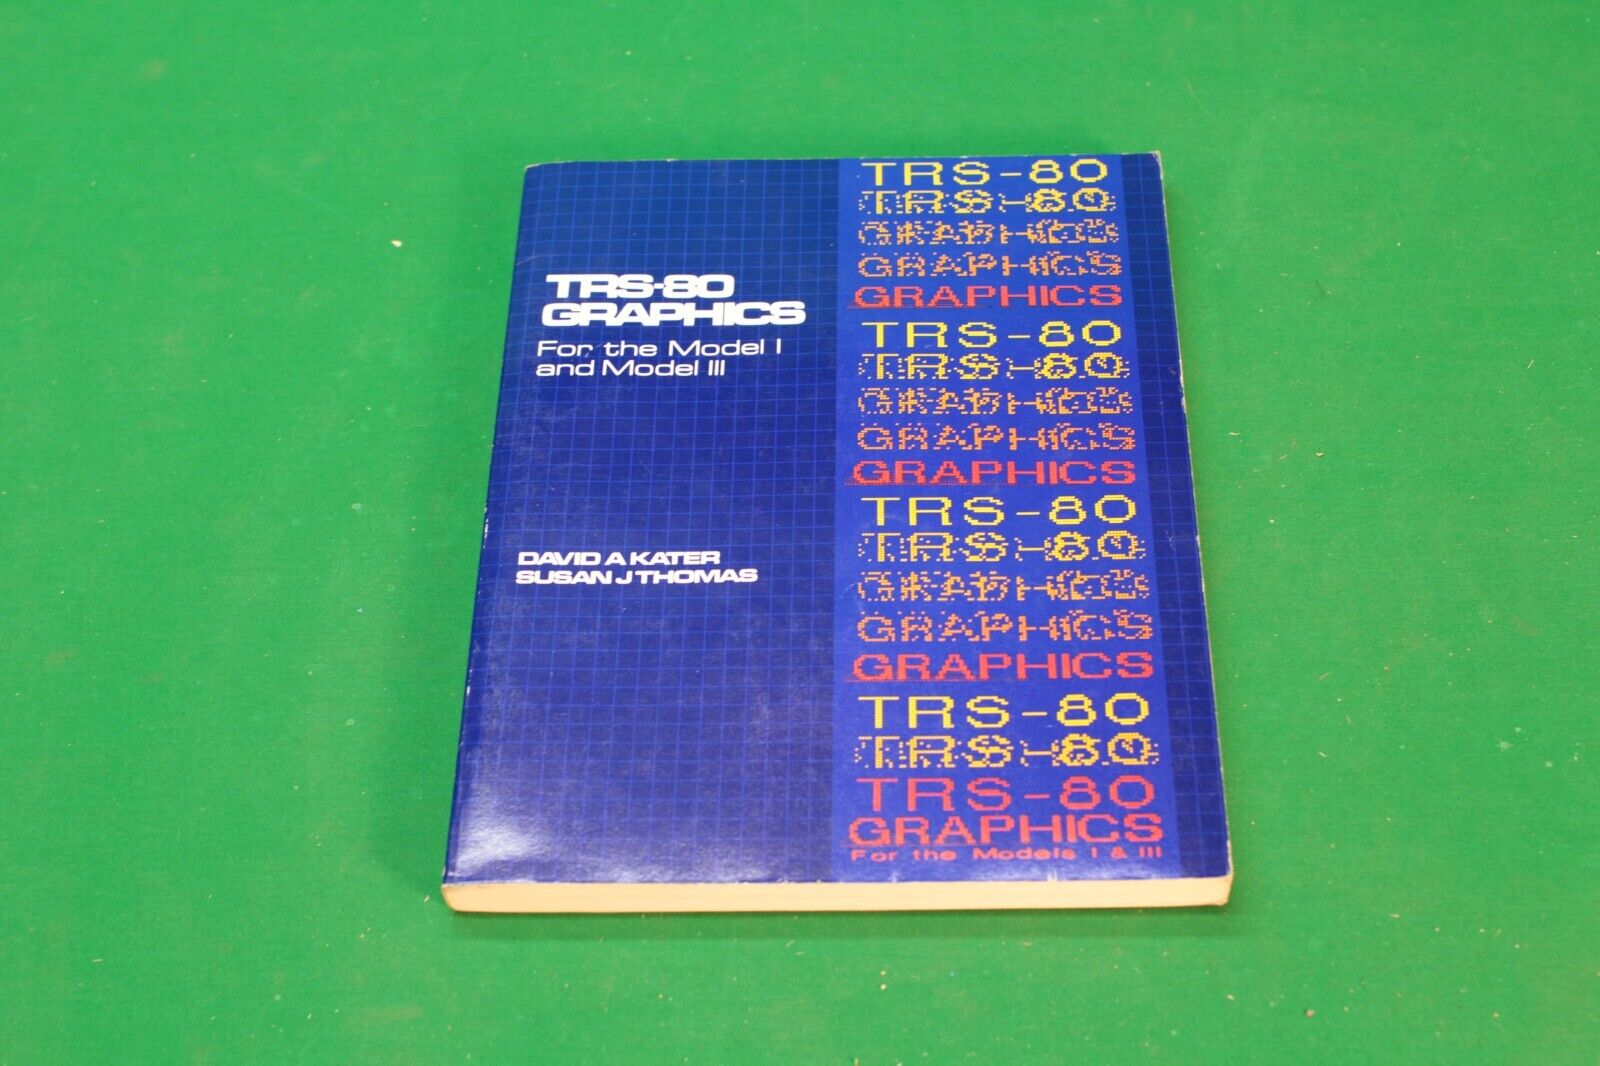 BYTE - TRS-80 GRAPHICS For the Model I and Model III - David Kater Susan Thomas